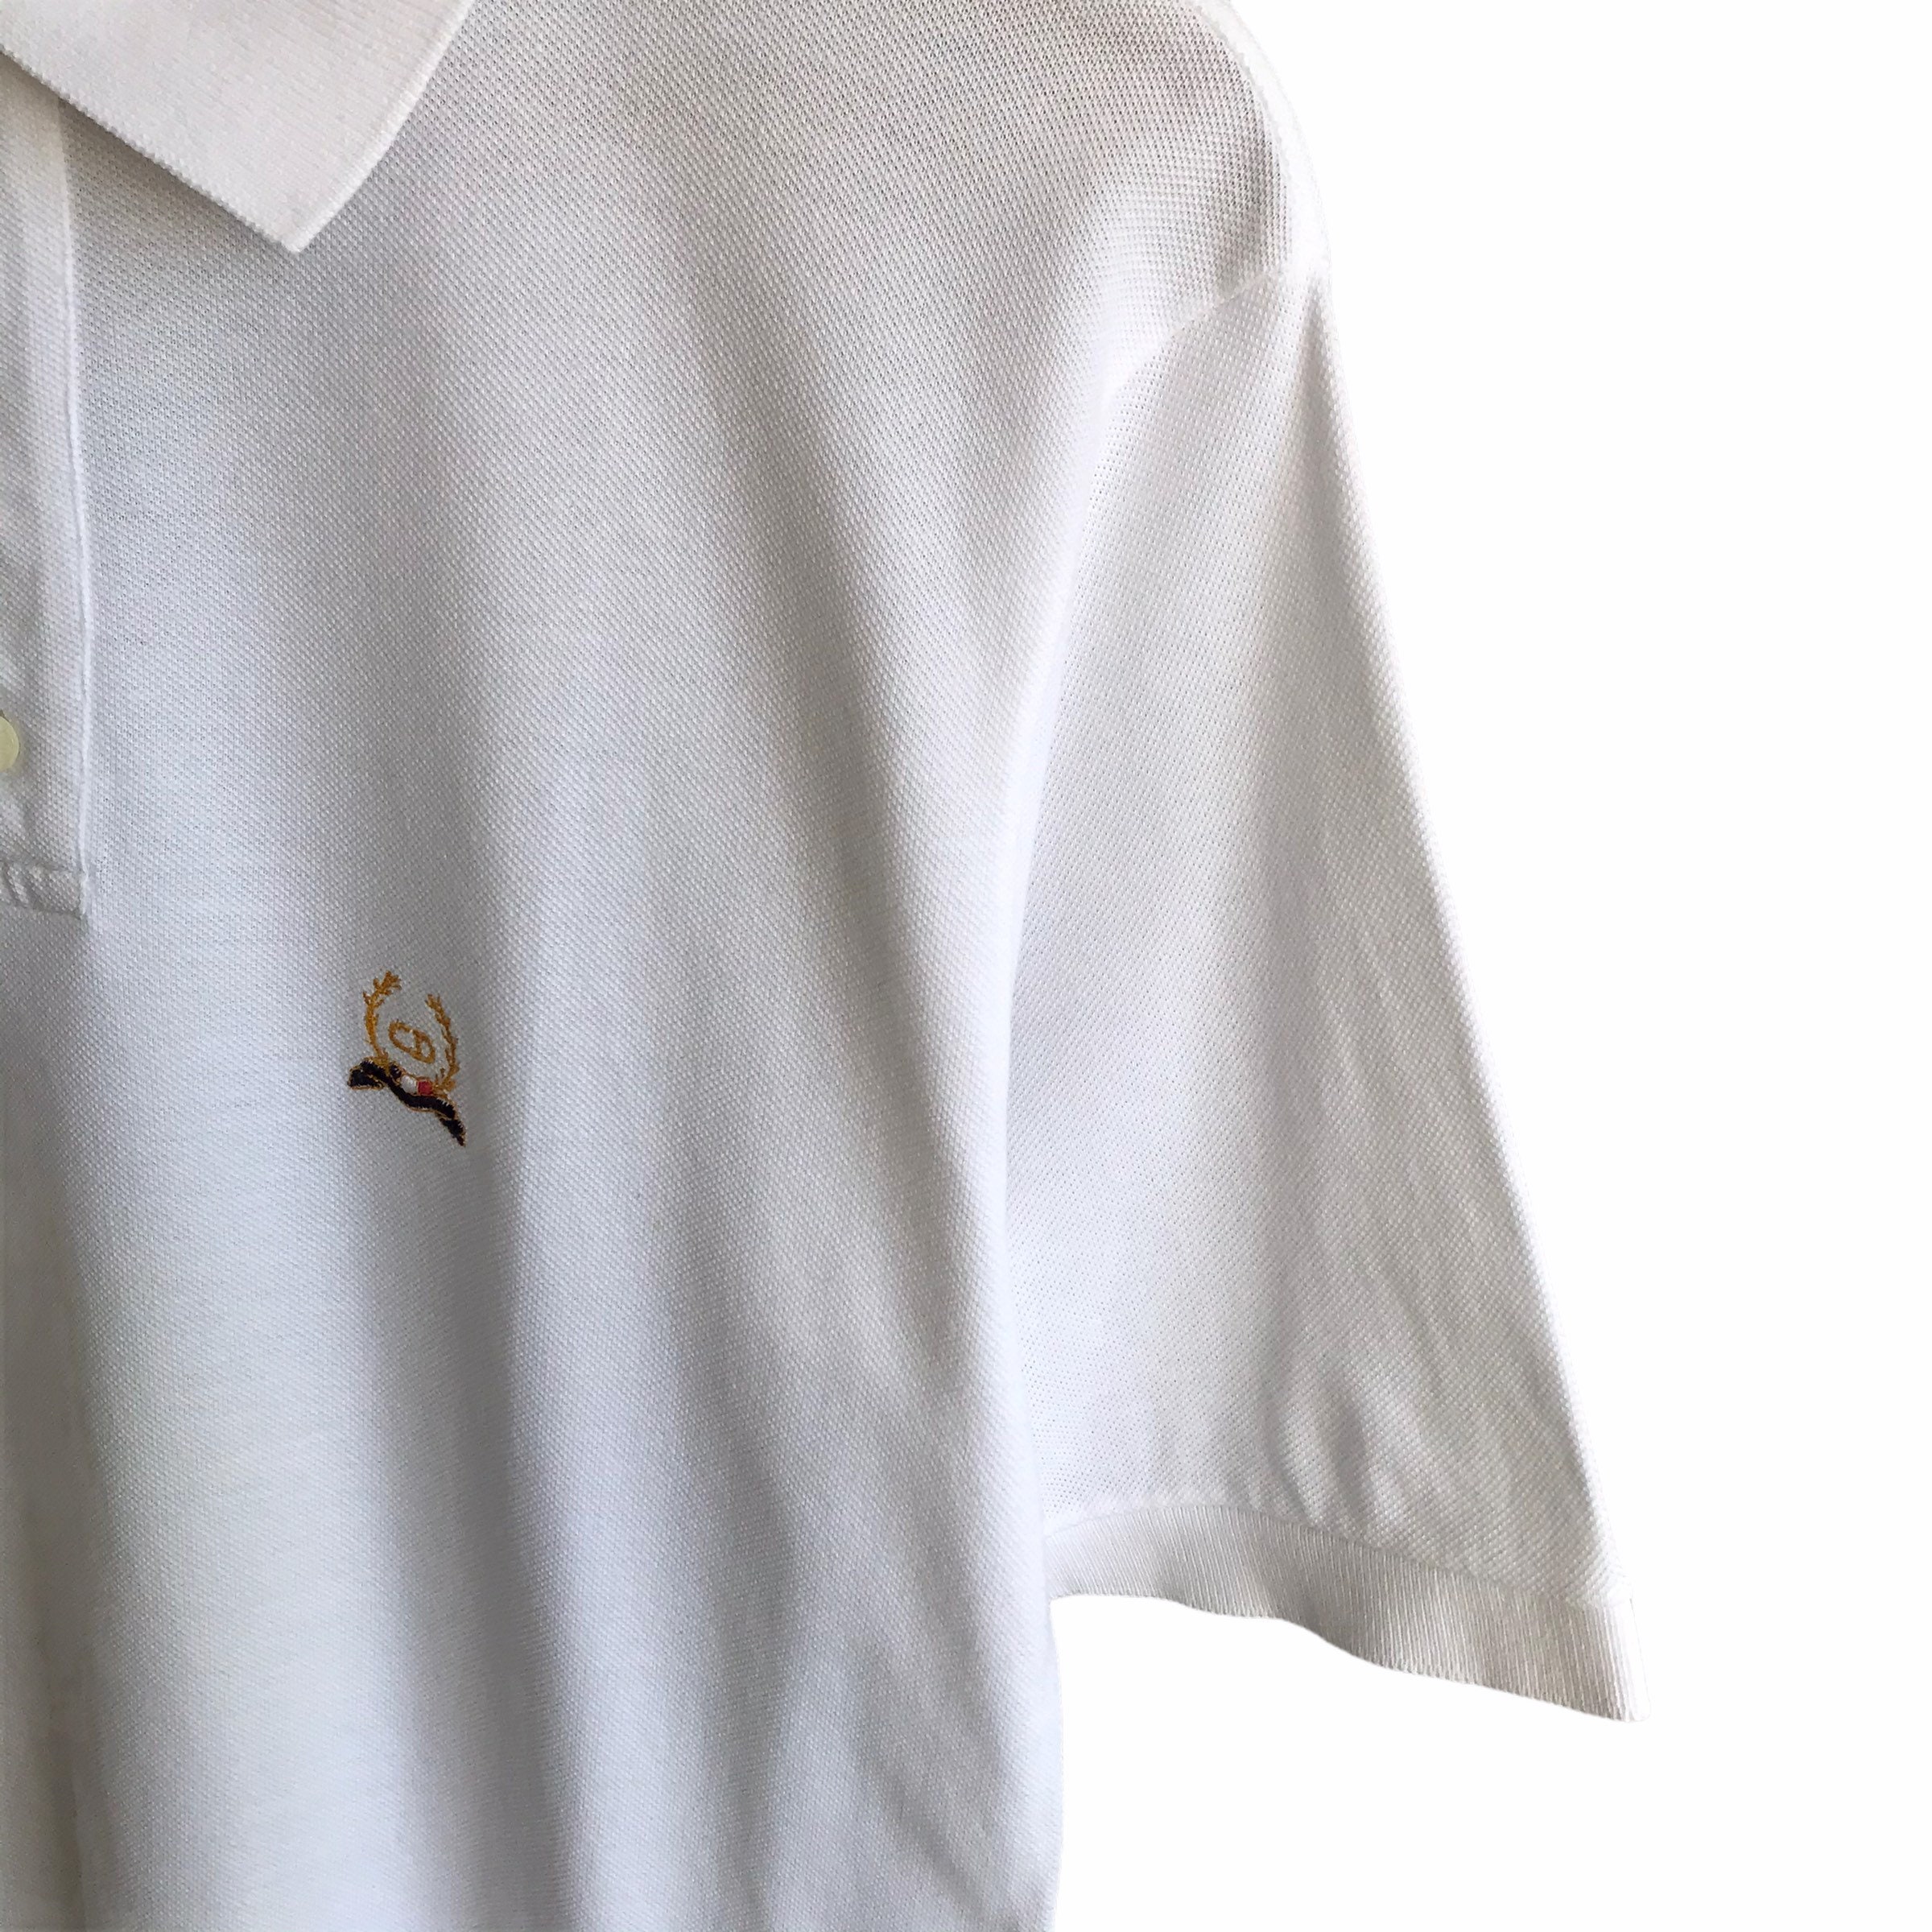 Vintage 90s Christian Dior Embroidered Small Logo Polo Shirt - Etsy